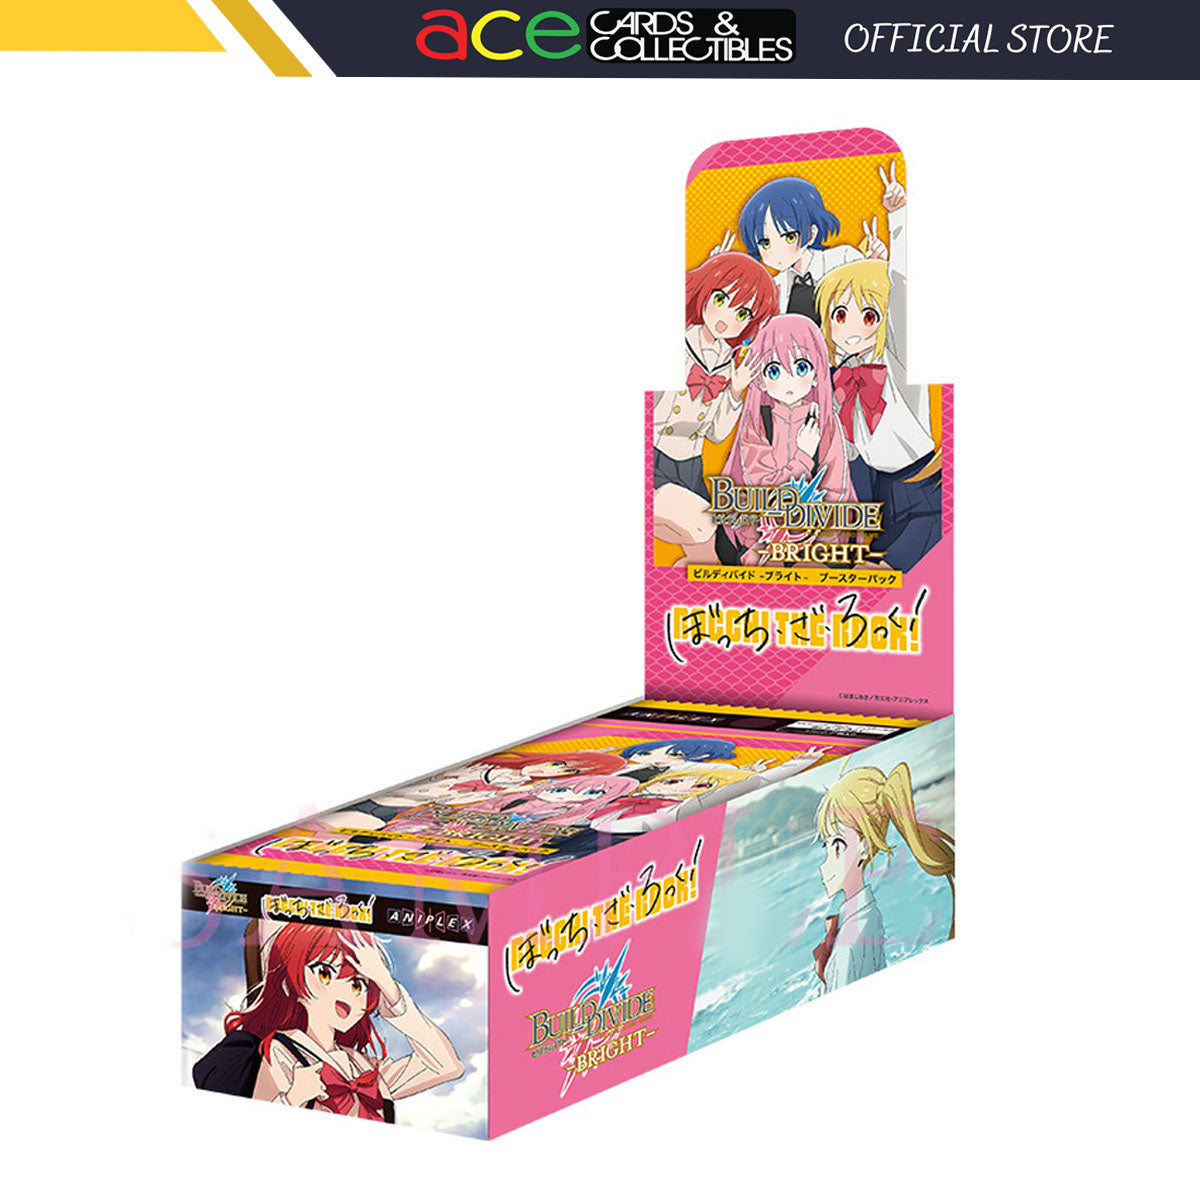 Build Divide -Bright- Booster Box "Bocchi The Rock" (Japanese)-Aniplex-Ace Cards & Collectibles